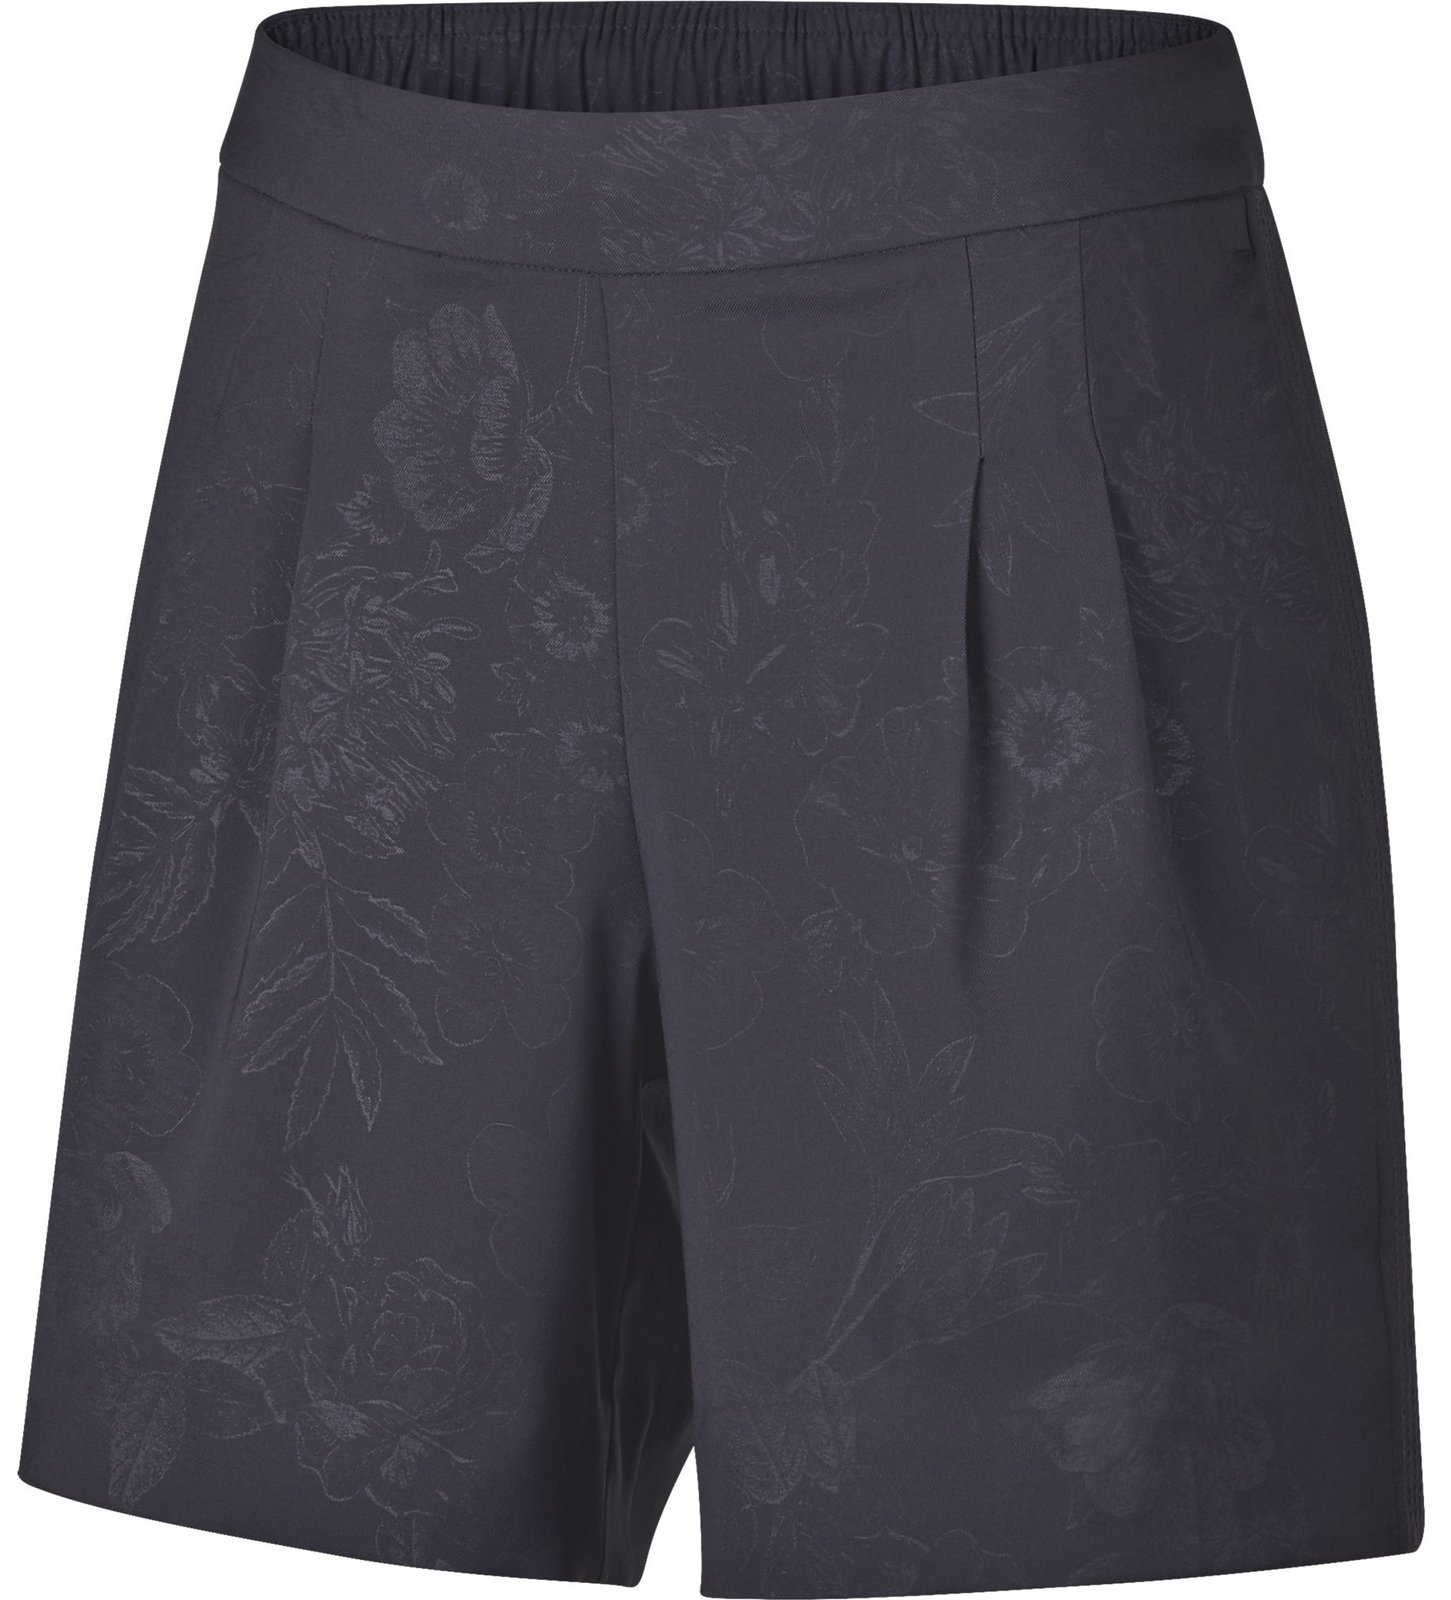 Shorts Nike Dri-Fit Floral Embossed Gridiron S